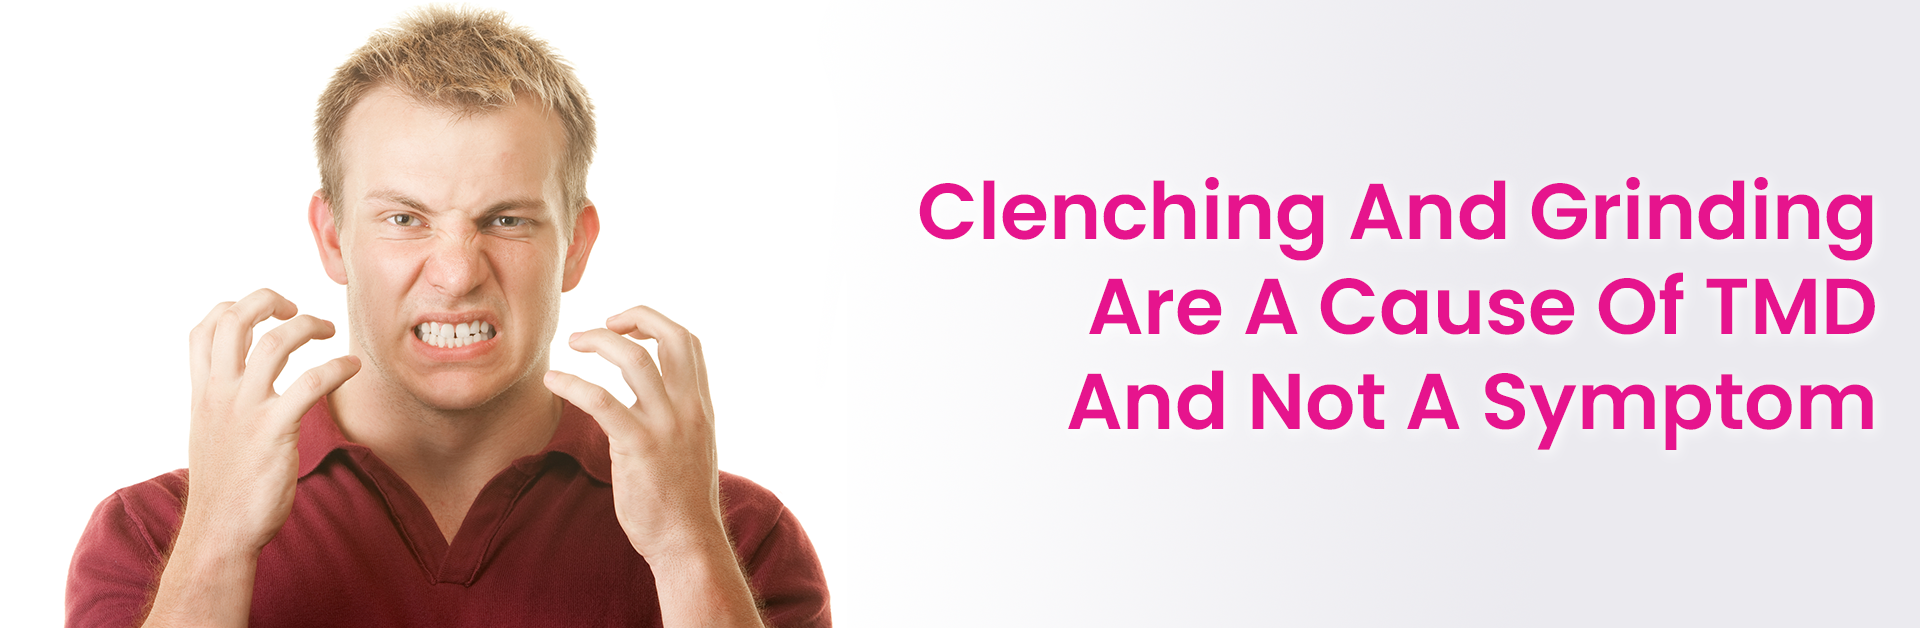 CLENCHING AND GRINDING IS A CAUSE OF TMD NOT A SYMPTOM!